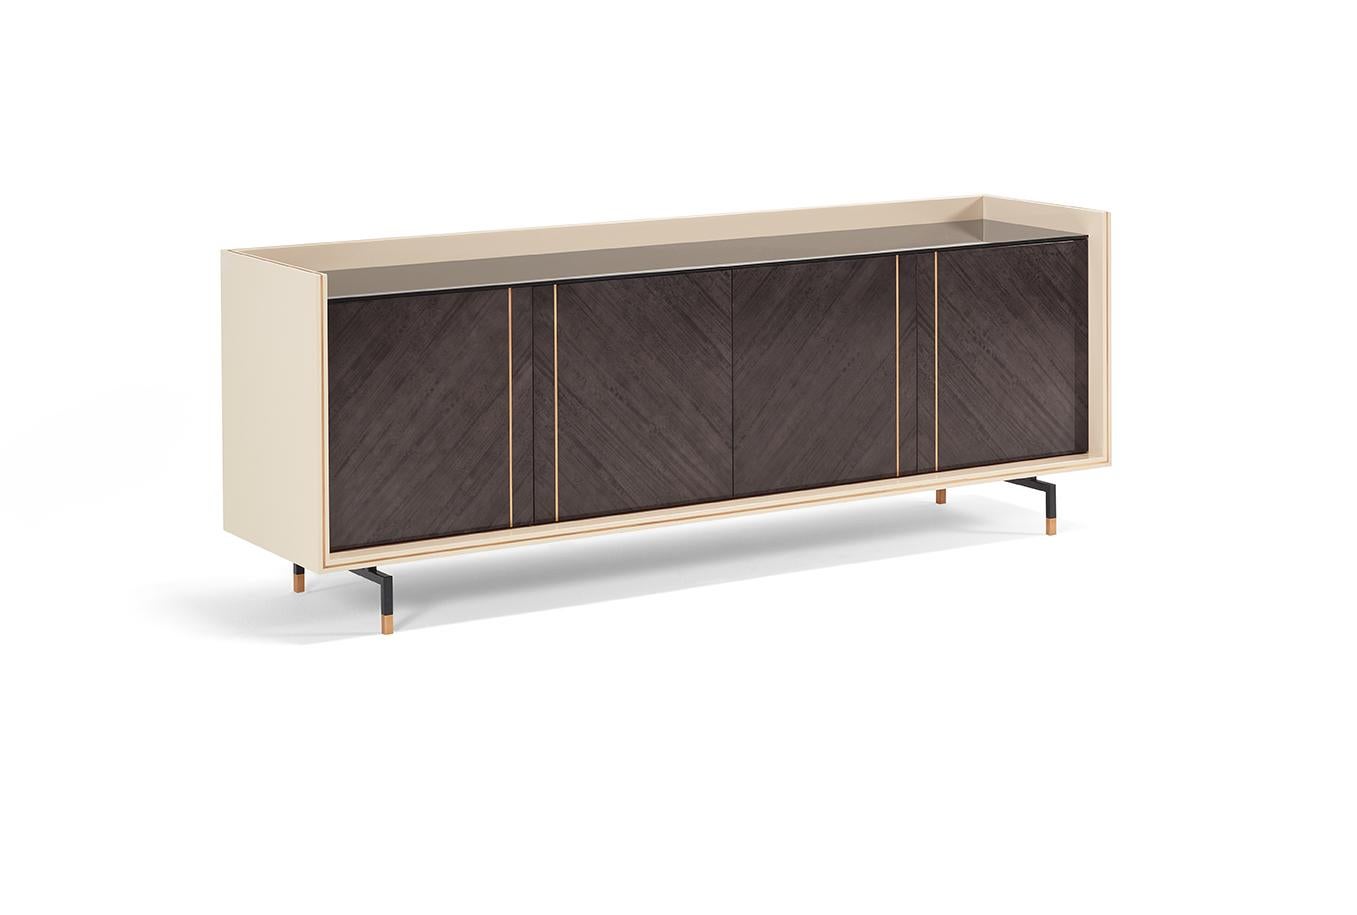 The straight-lines COOPER sideboard was designed for modern and sophisticated interior design spaces. The embracing wooden structure and the doors can combine different finishes for a unique result. The metallic feet gives it lightness and a modern